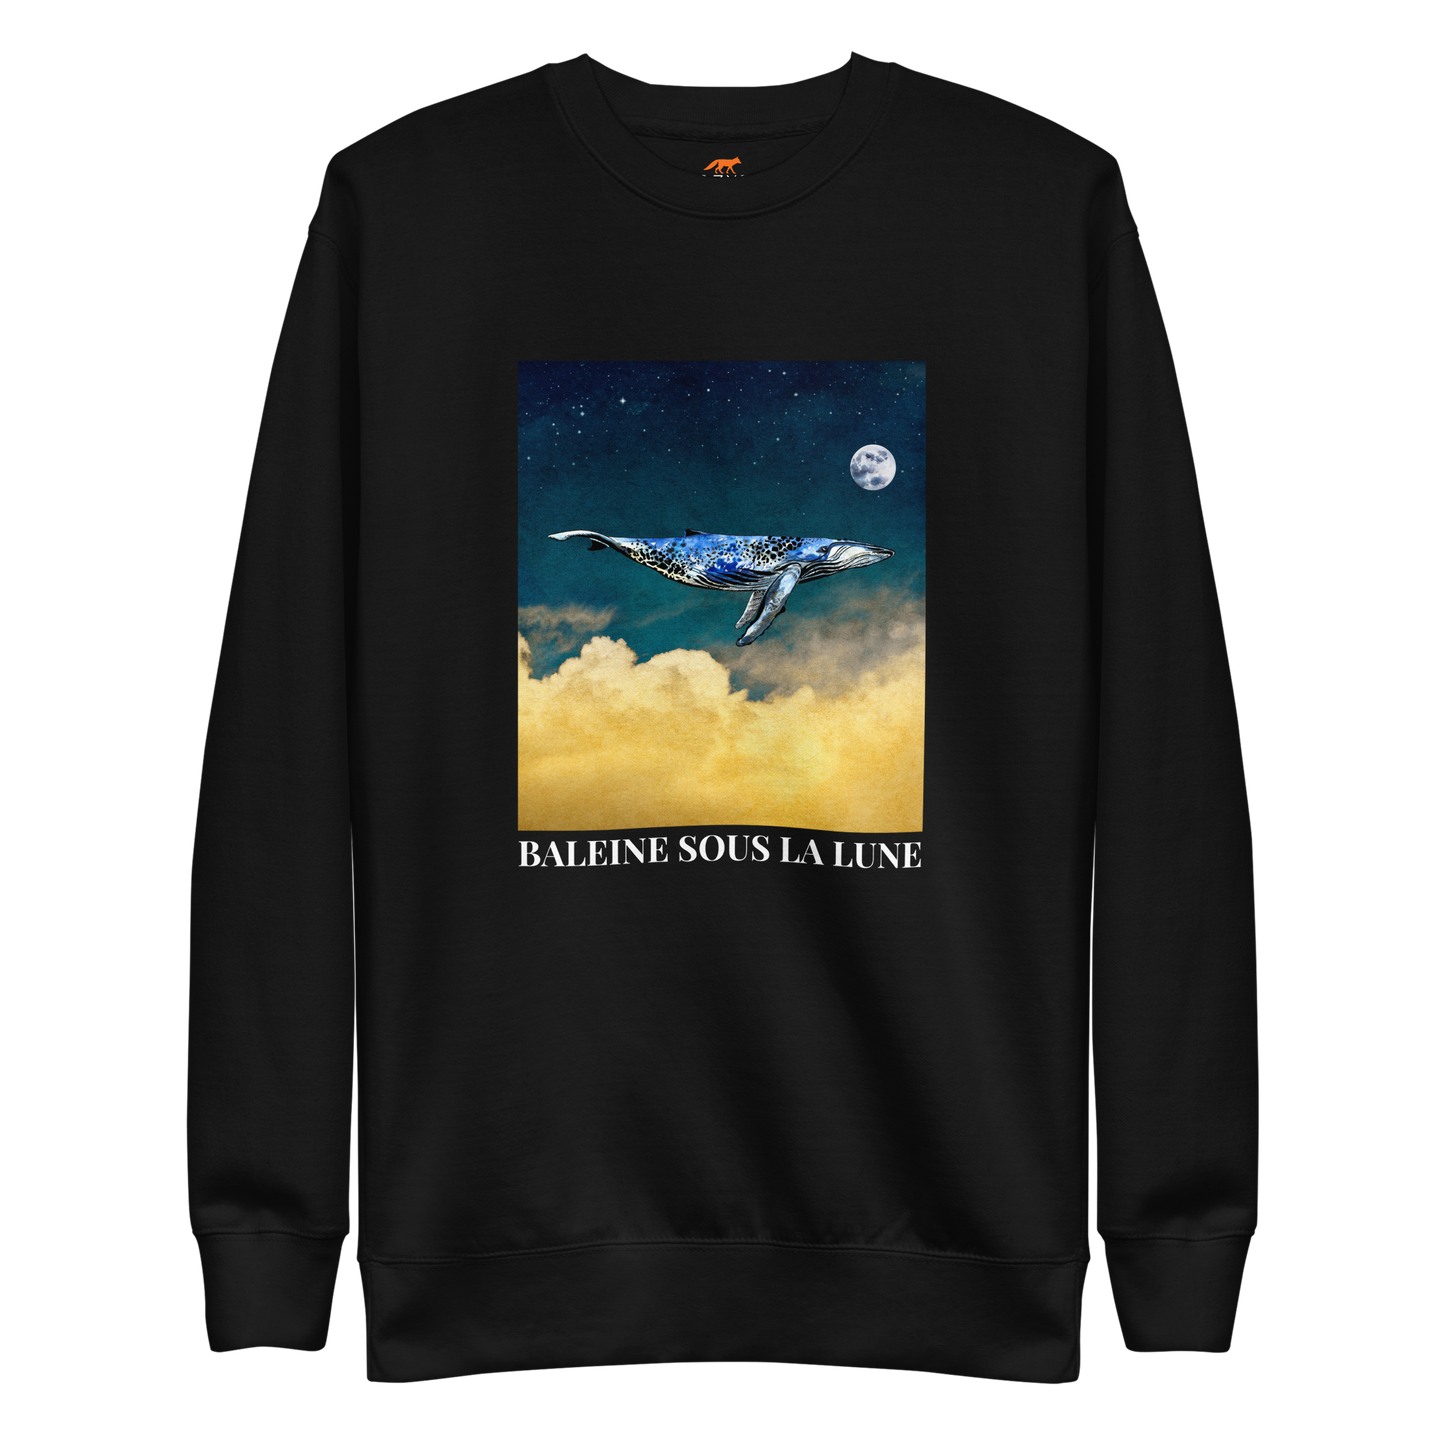 Black Premium Whale Sweatshirt featuring a majestic Whale Under The Moon graphic on the chest - Cool Graphic Whale Sweatshirts - Boozy Fox